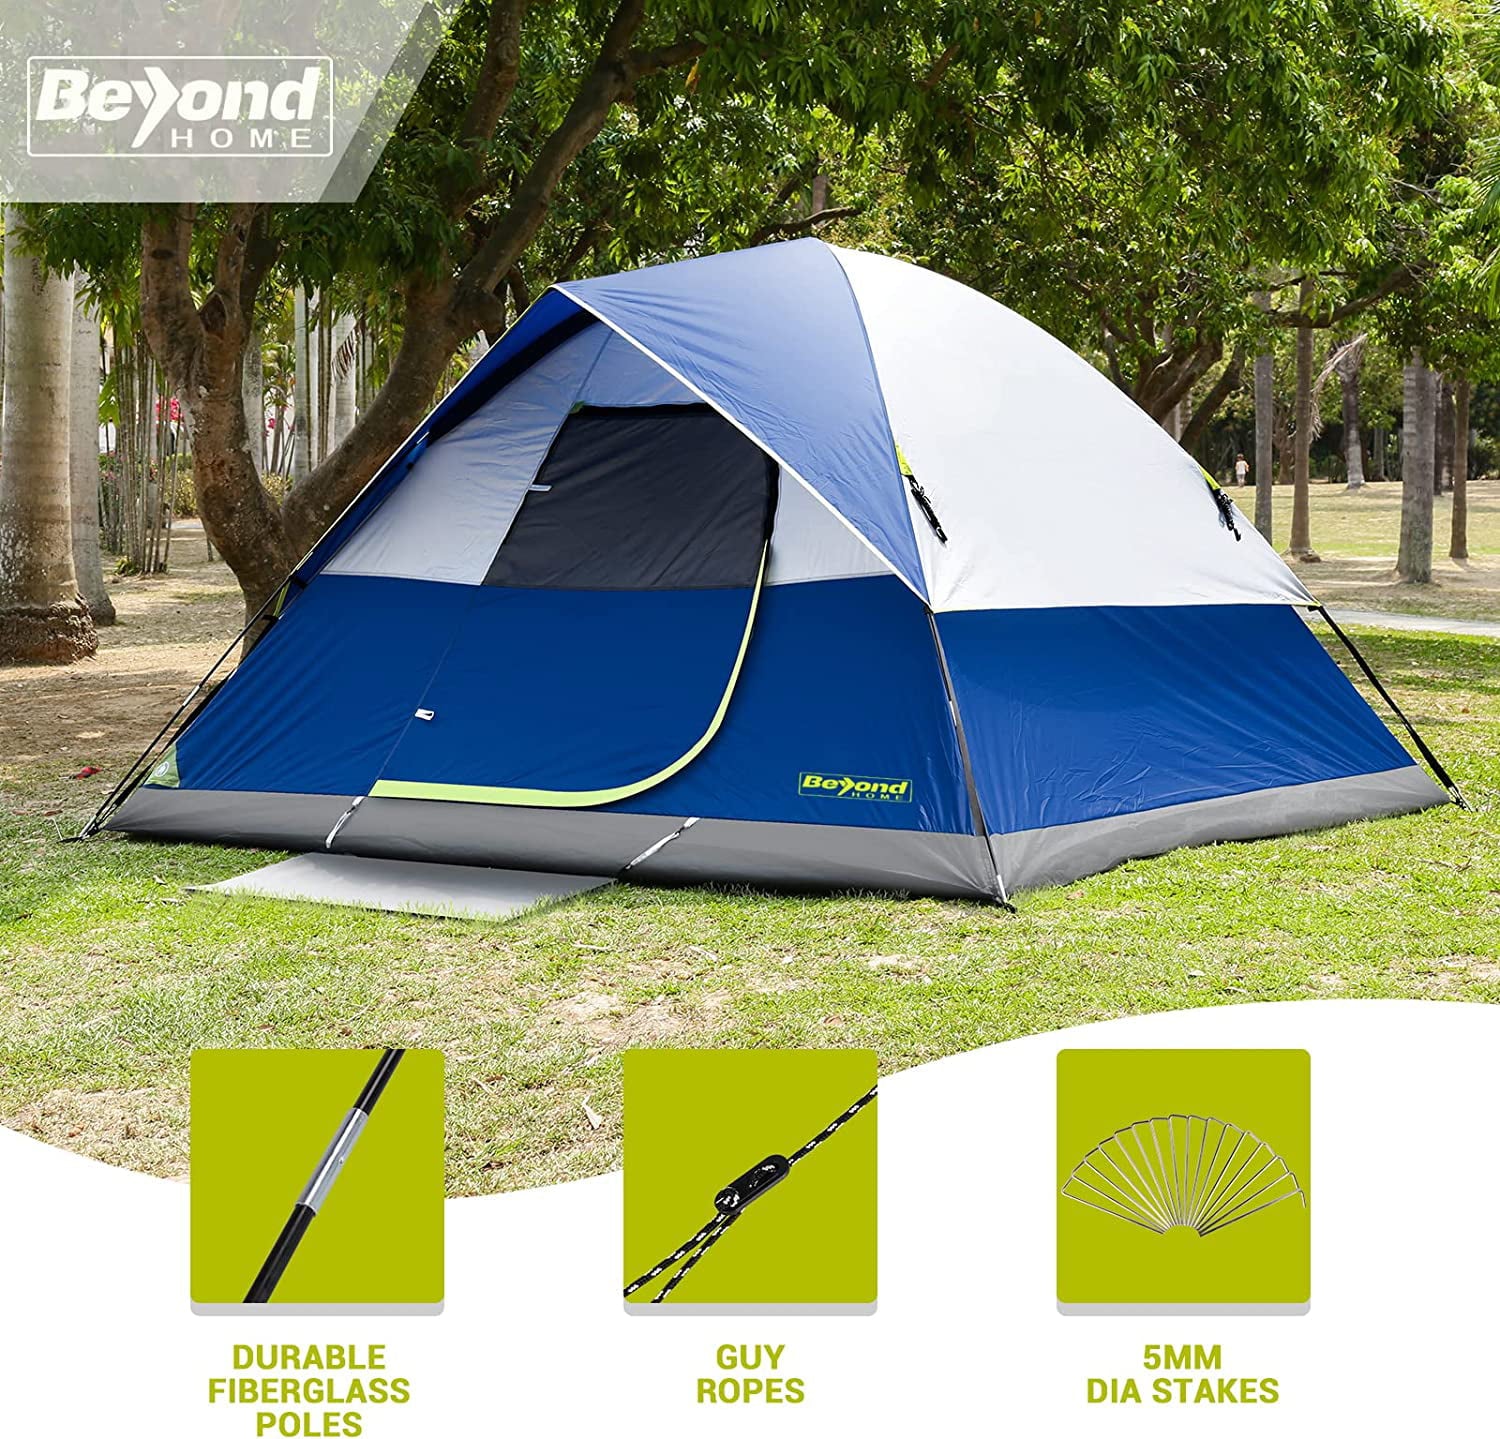 BeyondHOME Dome Camping Tent， 6-Person Tent for Family Camping and Outdoor Hiking， Upgraded Ventilation